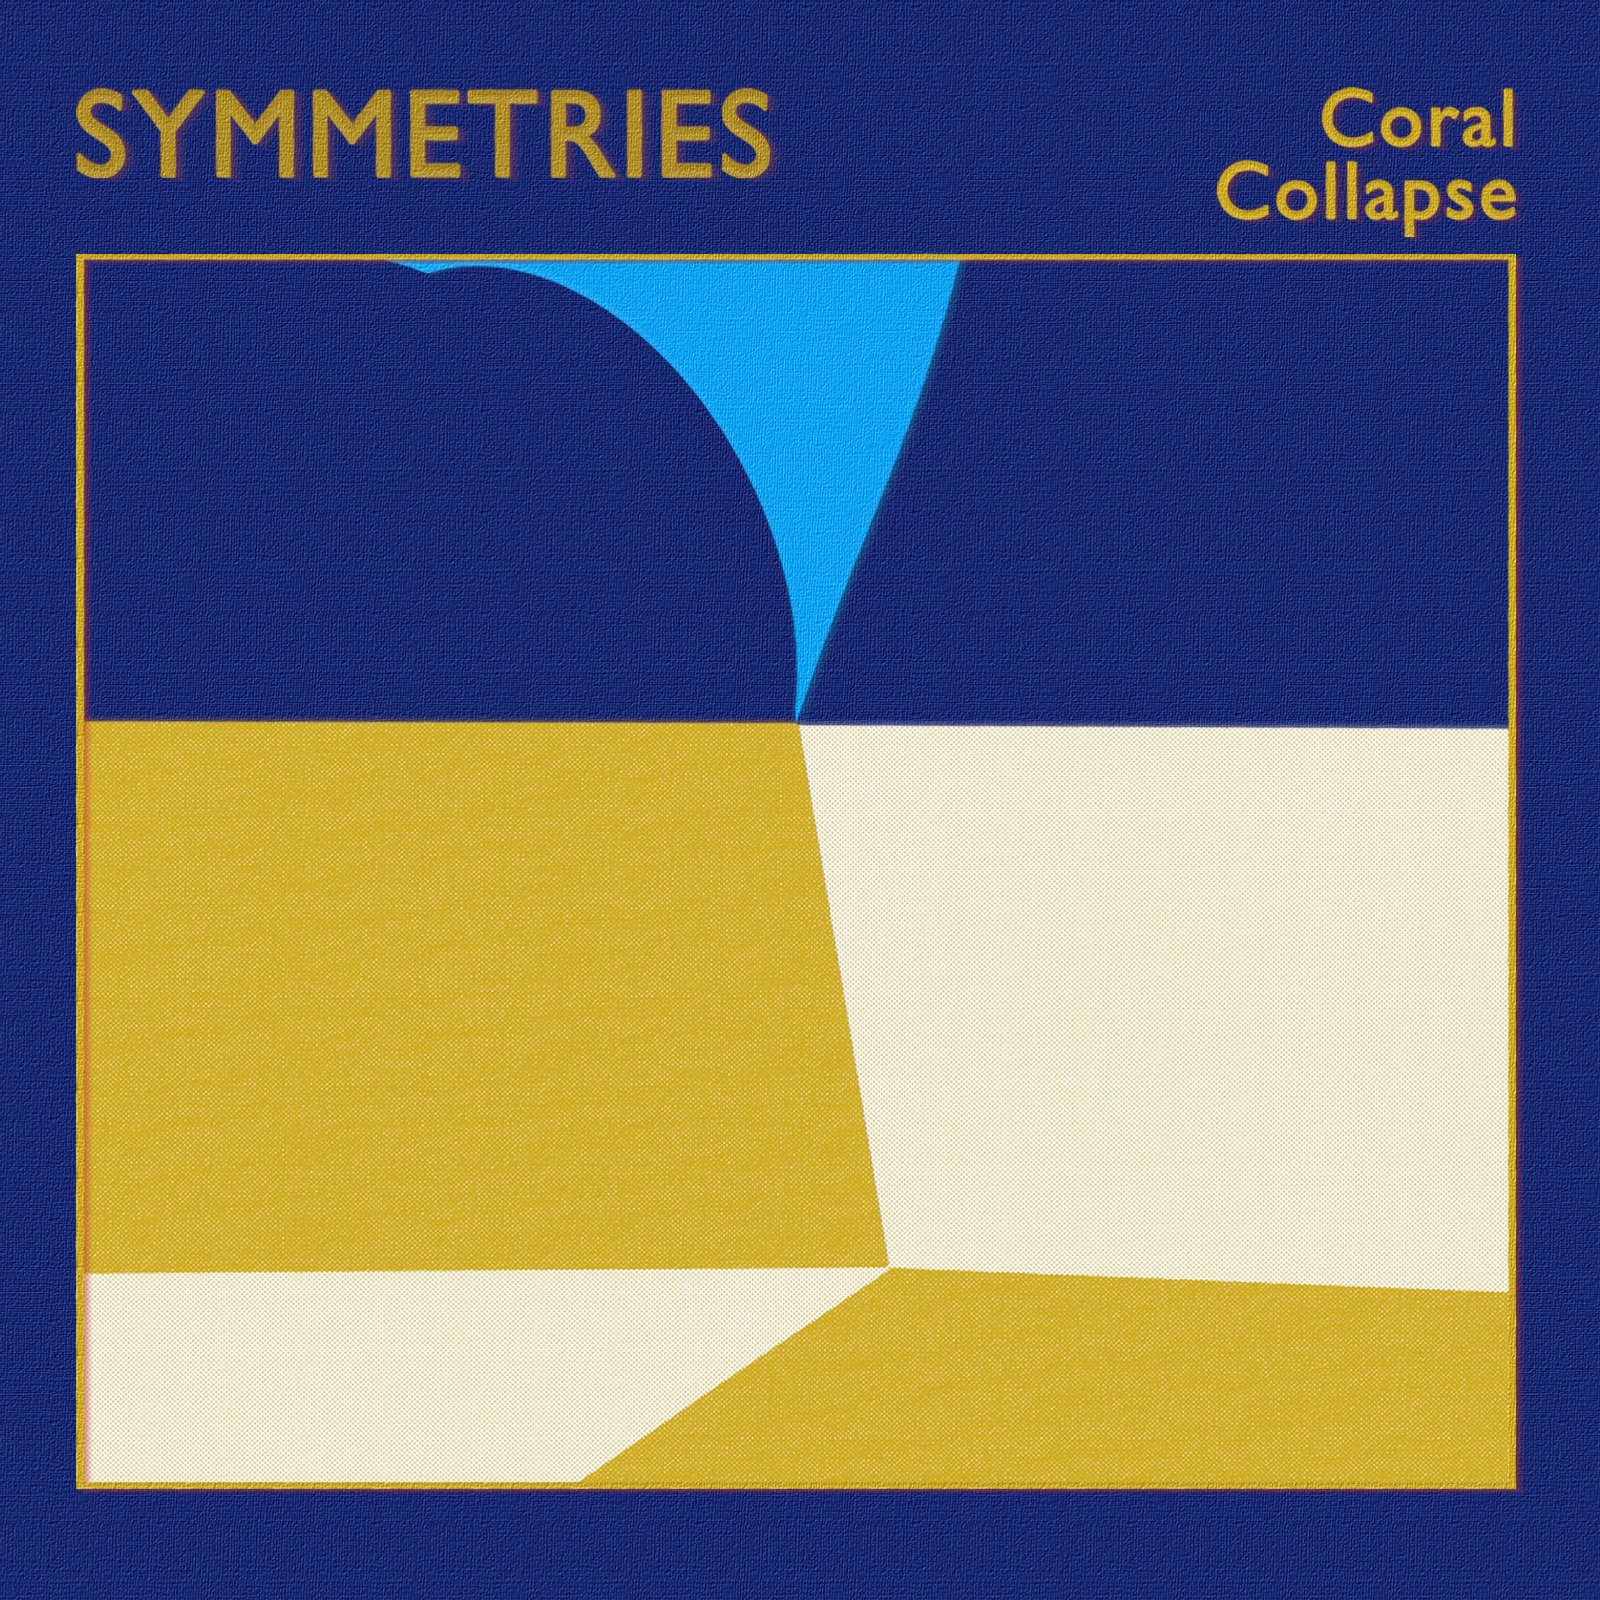 Coral Collapse - Symmetries COVER (1).jpg